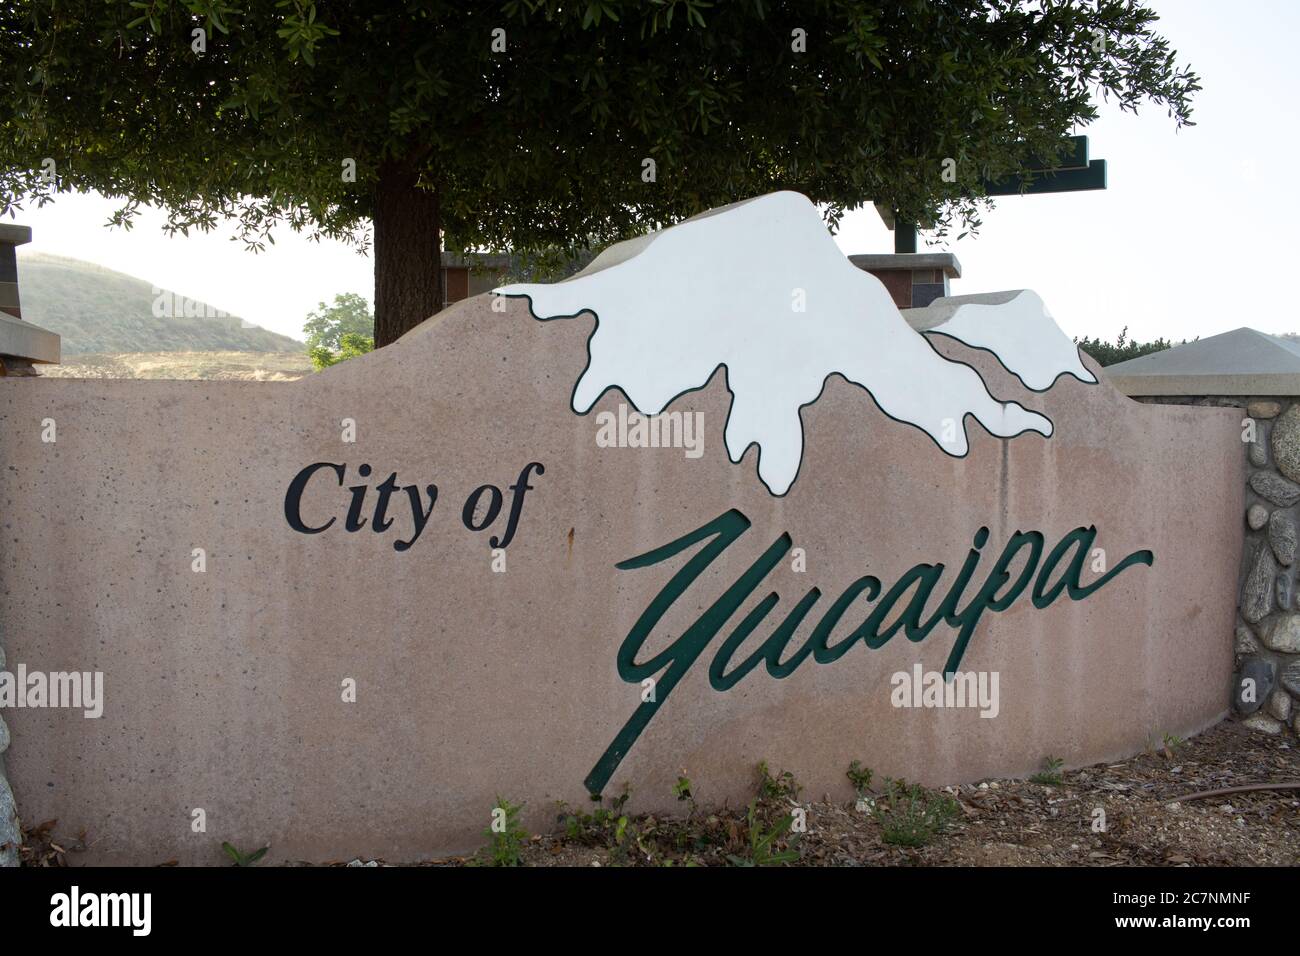 YUCAIPA, UNITED STATES - May 29, 2020: Welcome sign to the City of Yucaipa in San Bernardino County (California) located at the Oak Glen Rd exit on I- Stock Photo